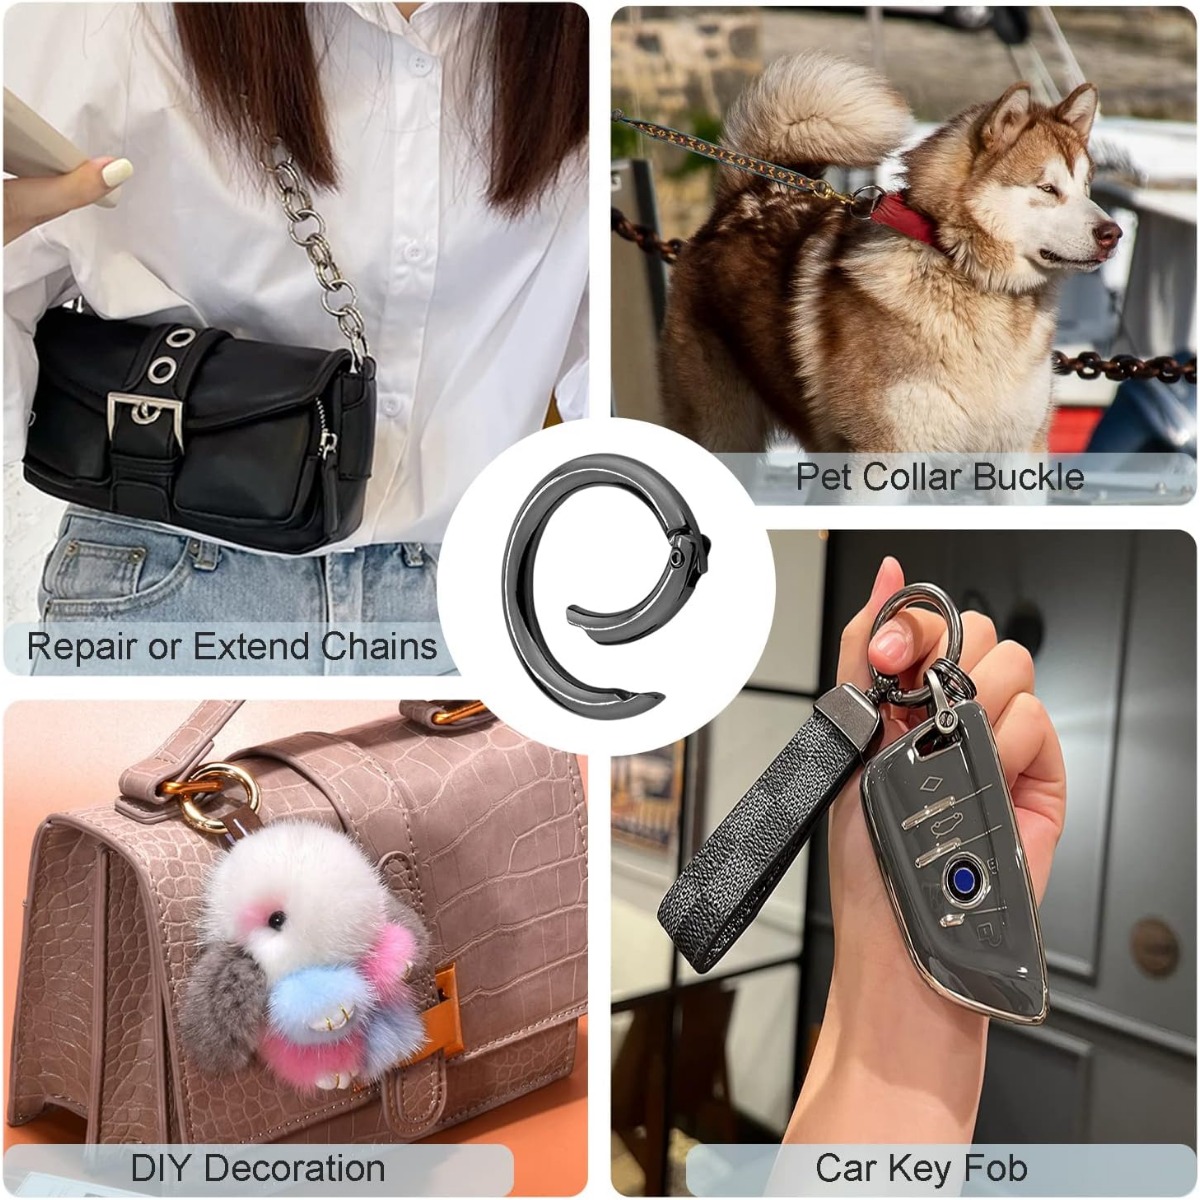 Dog Key FOB Ring - Key Chain Decoration for bags with clasp